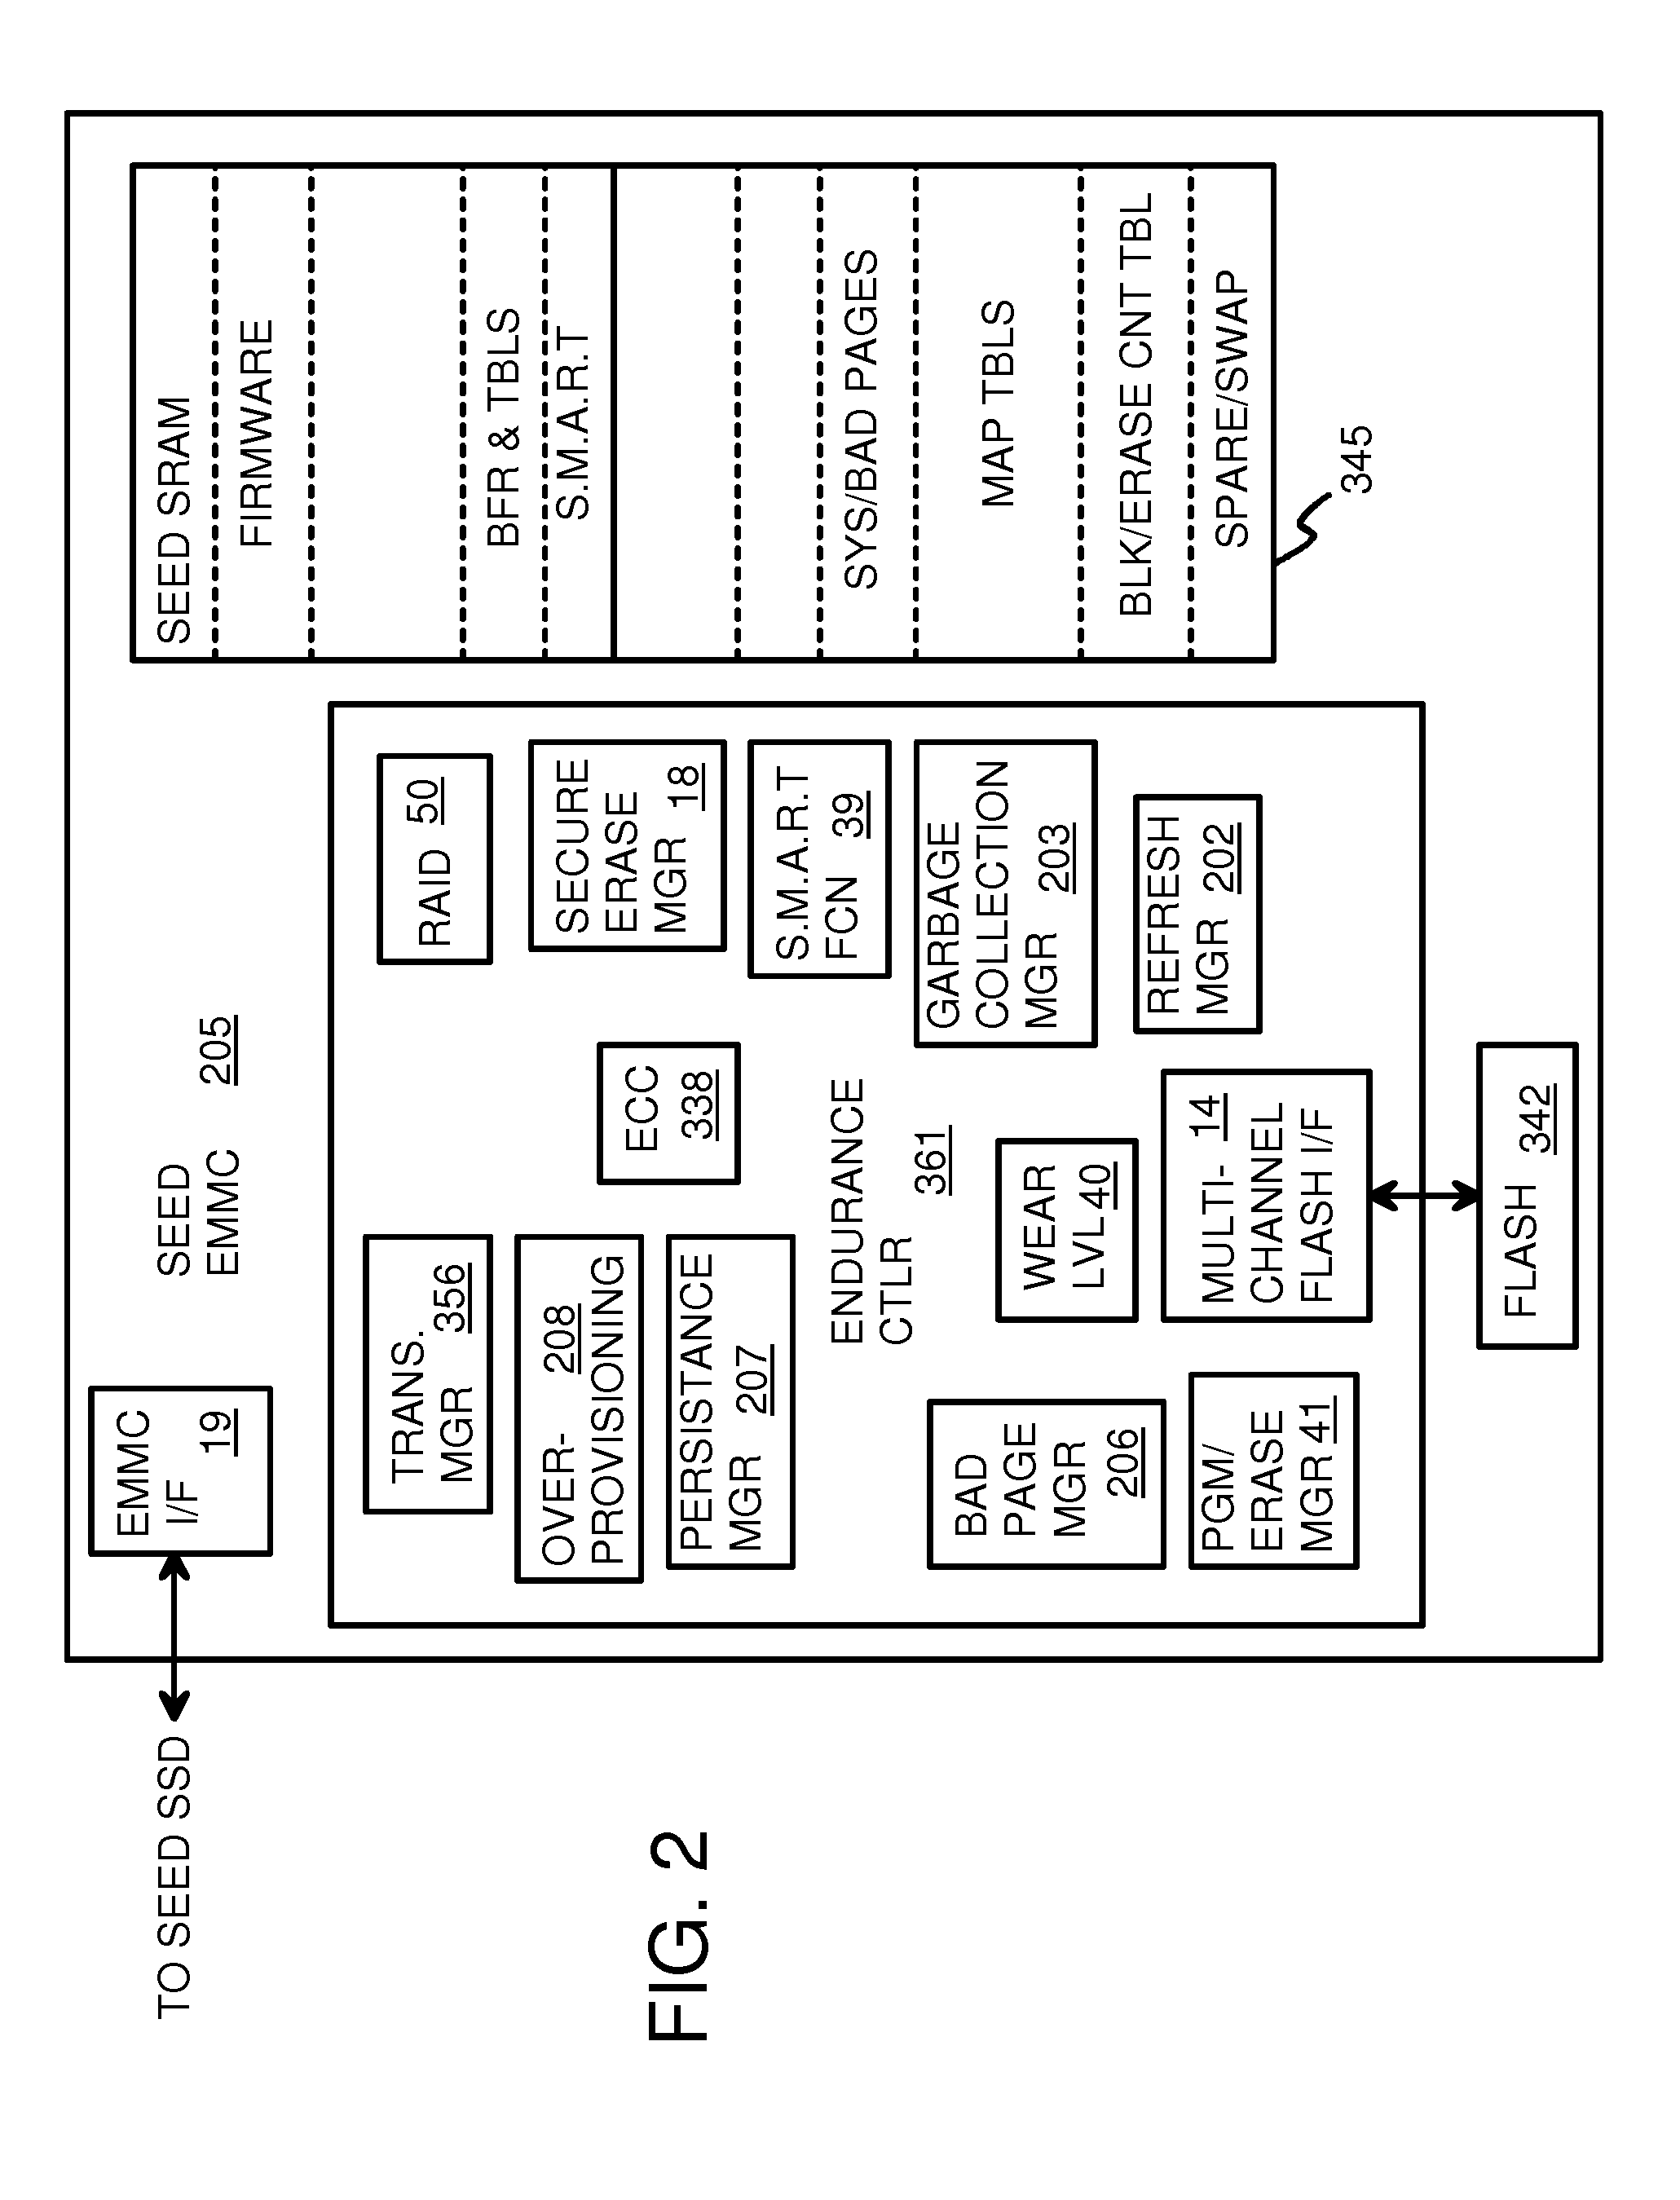 Green eMMC Device (GeD) Controller with DRAM Data Persistence, Data-Type Splitting, Meta-Page Grouping, and Diversion of Temp Files for Enhanced Flash Endurance